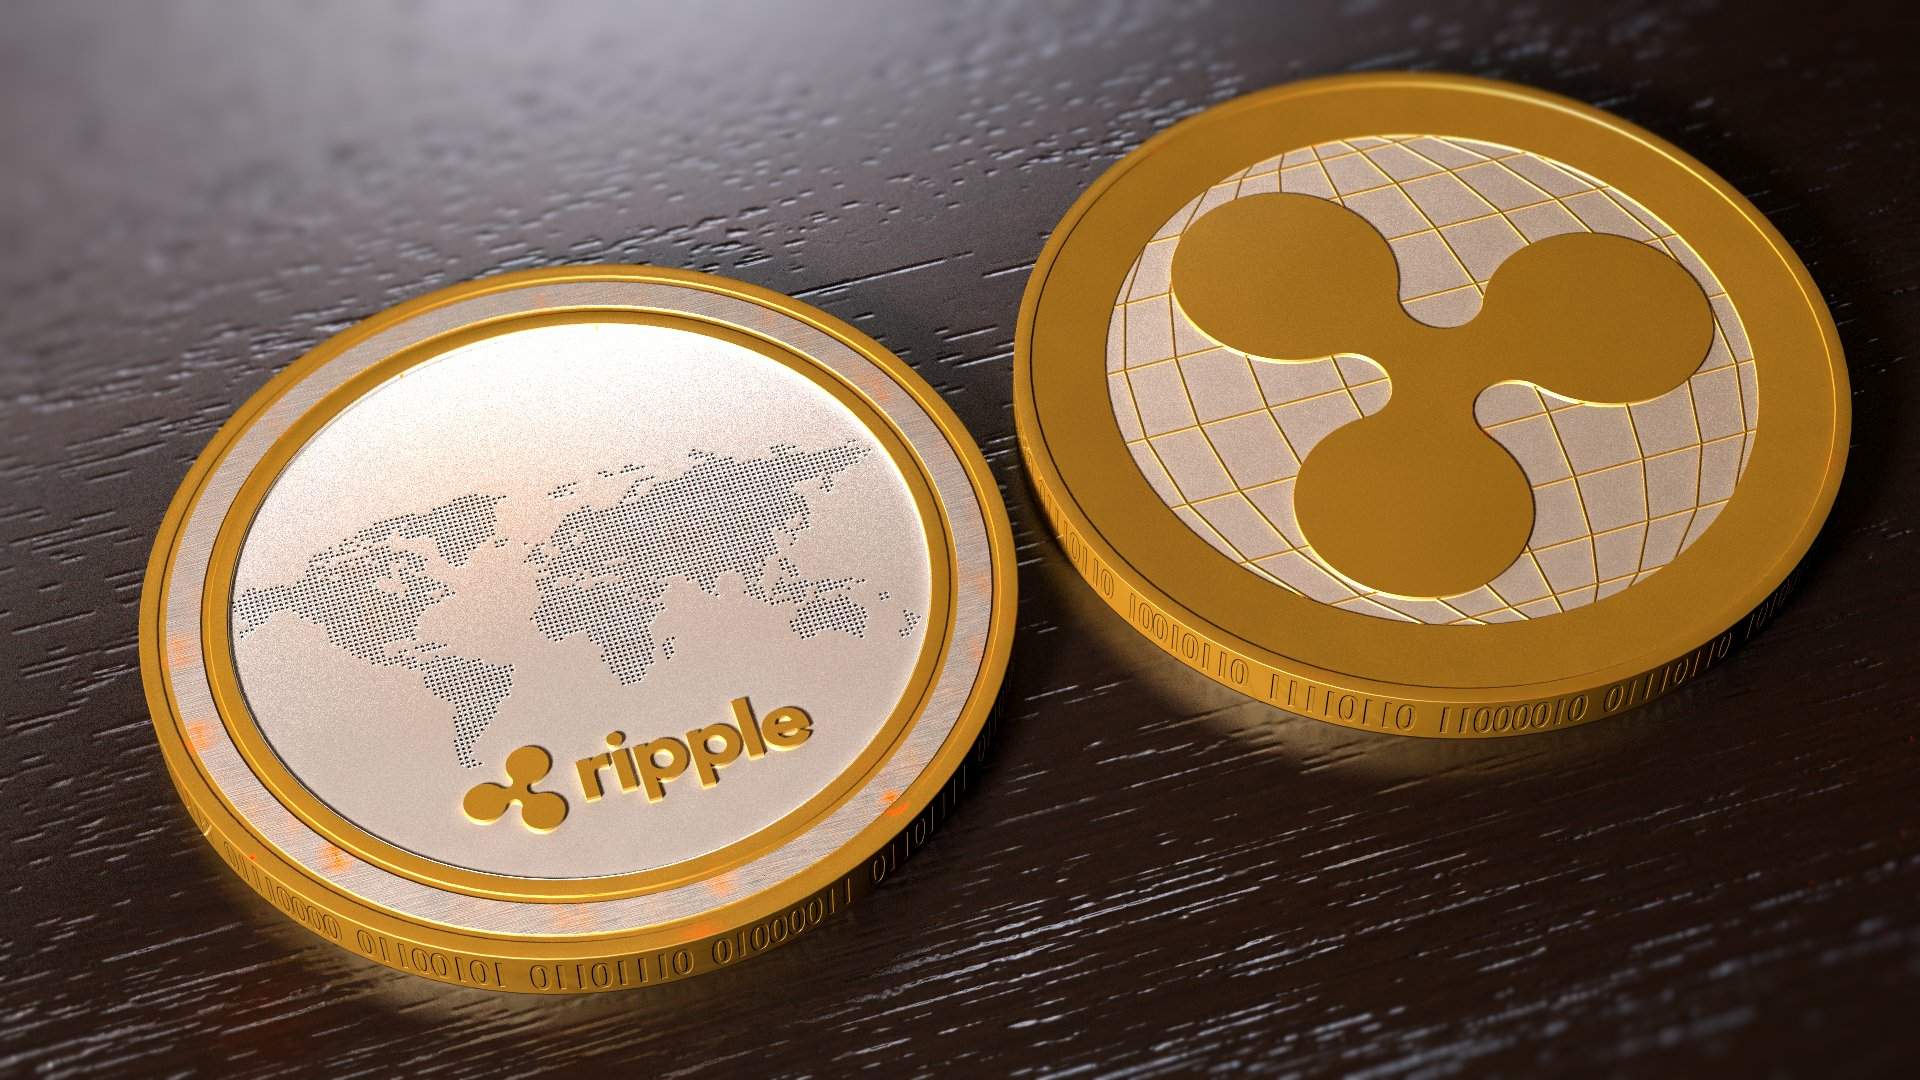 Ripple has over 100 clients as mainstream finance warms to blockchain